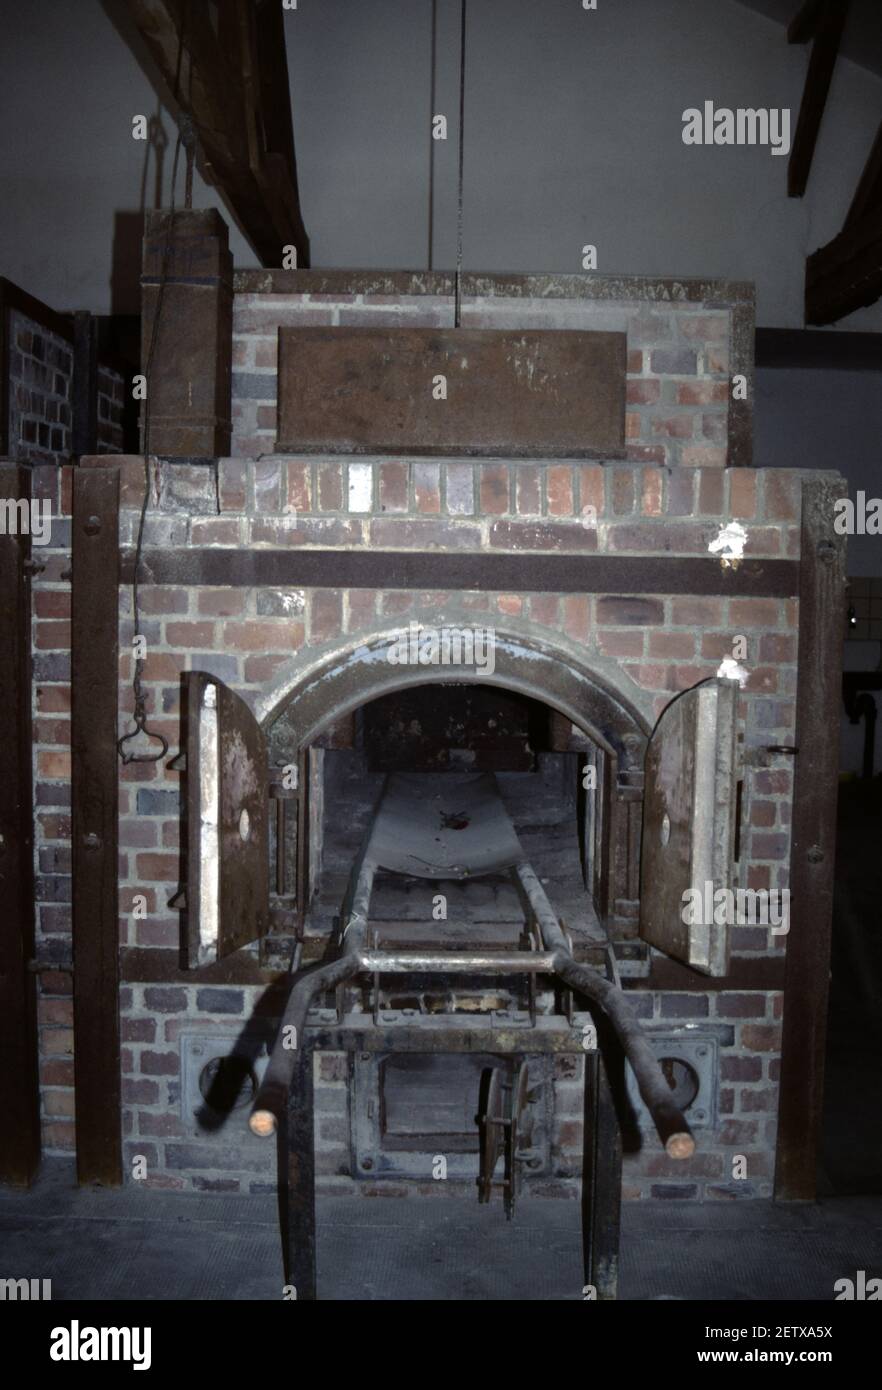 Dachau, Germany. 6/26/1990. Out of the five ovens at Dachau concentration  camp, four were made by H. Kori and one by Topf & Söhne Stock Photo - Alamy